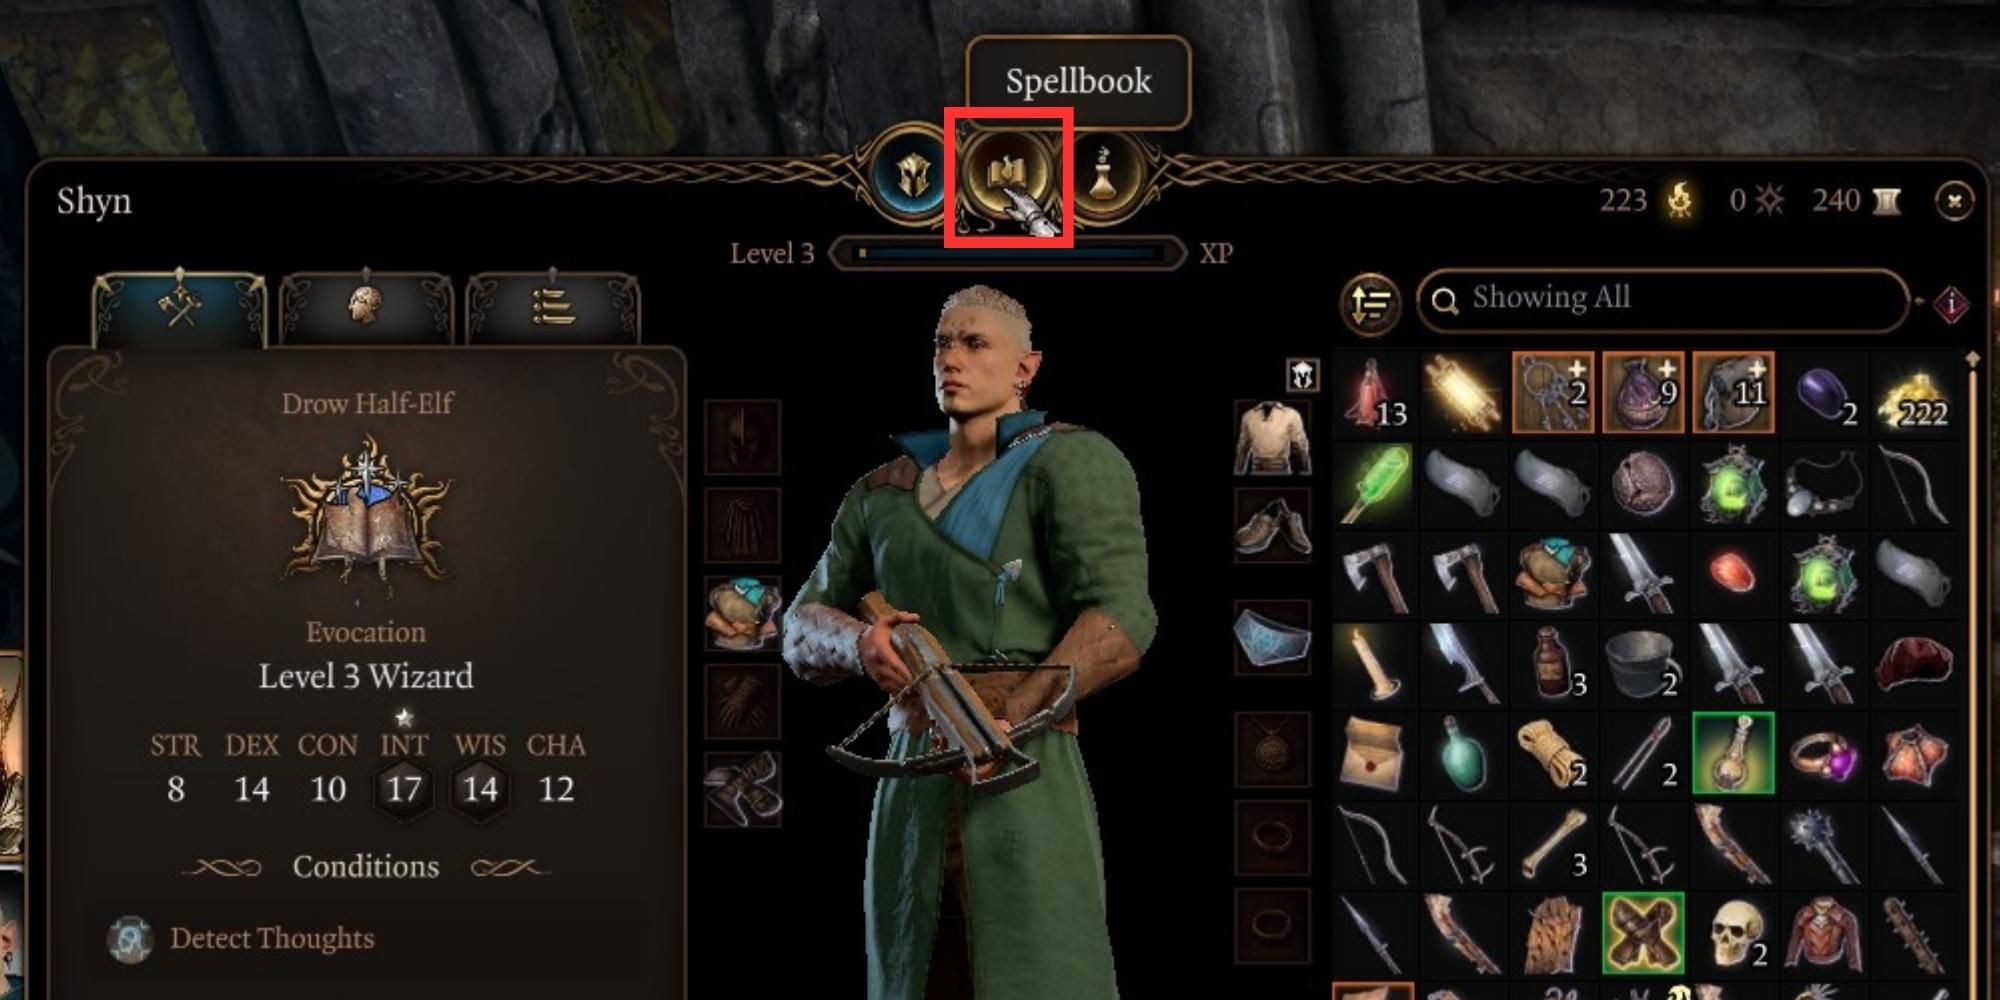 highlighted spellbook icon on character screen in baldur's gate 3